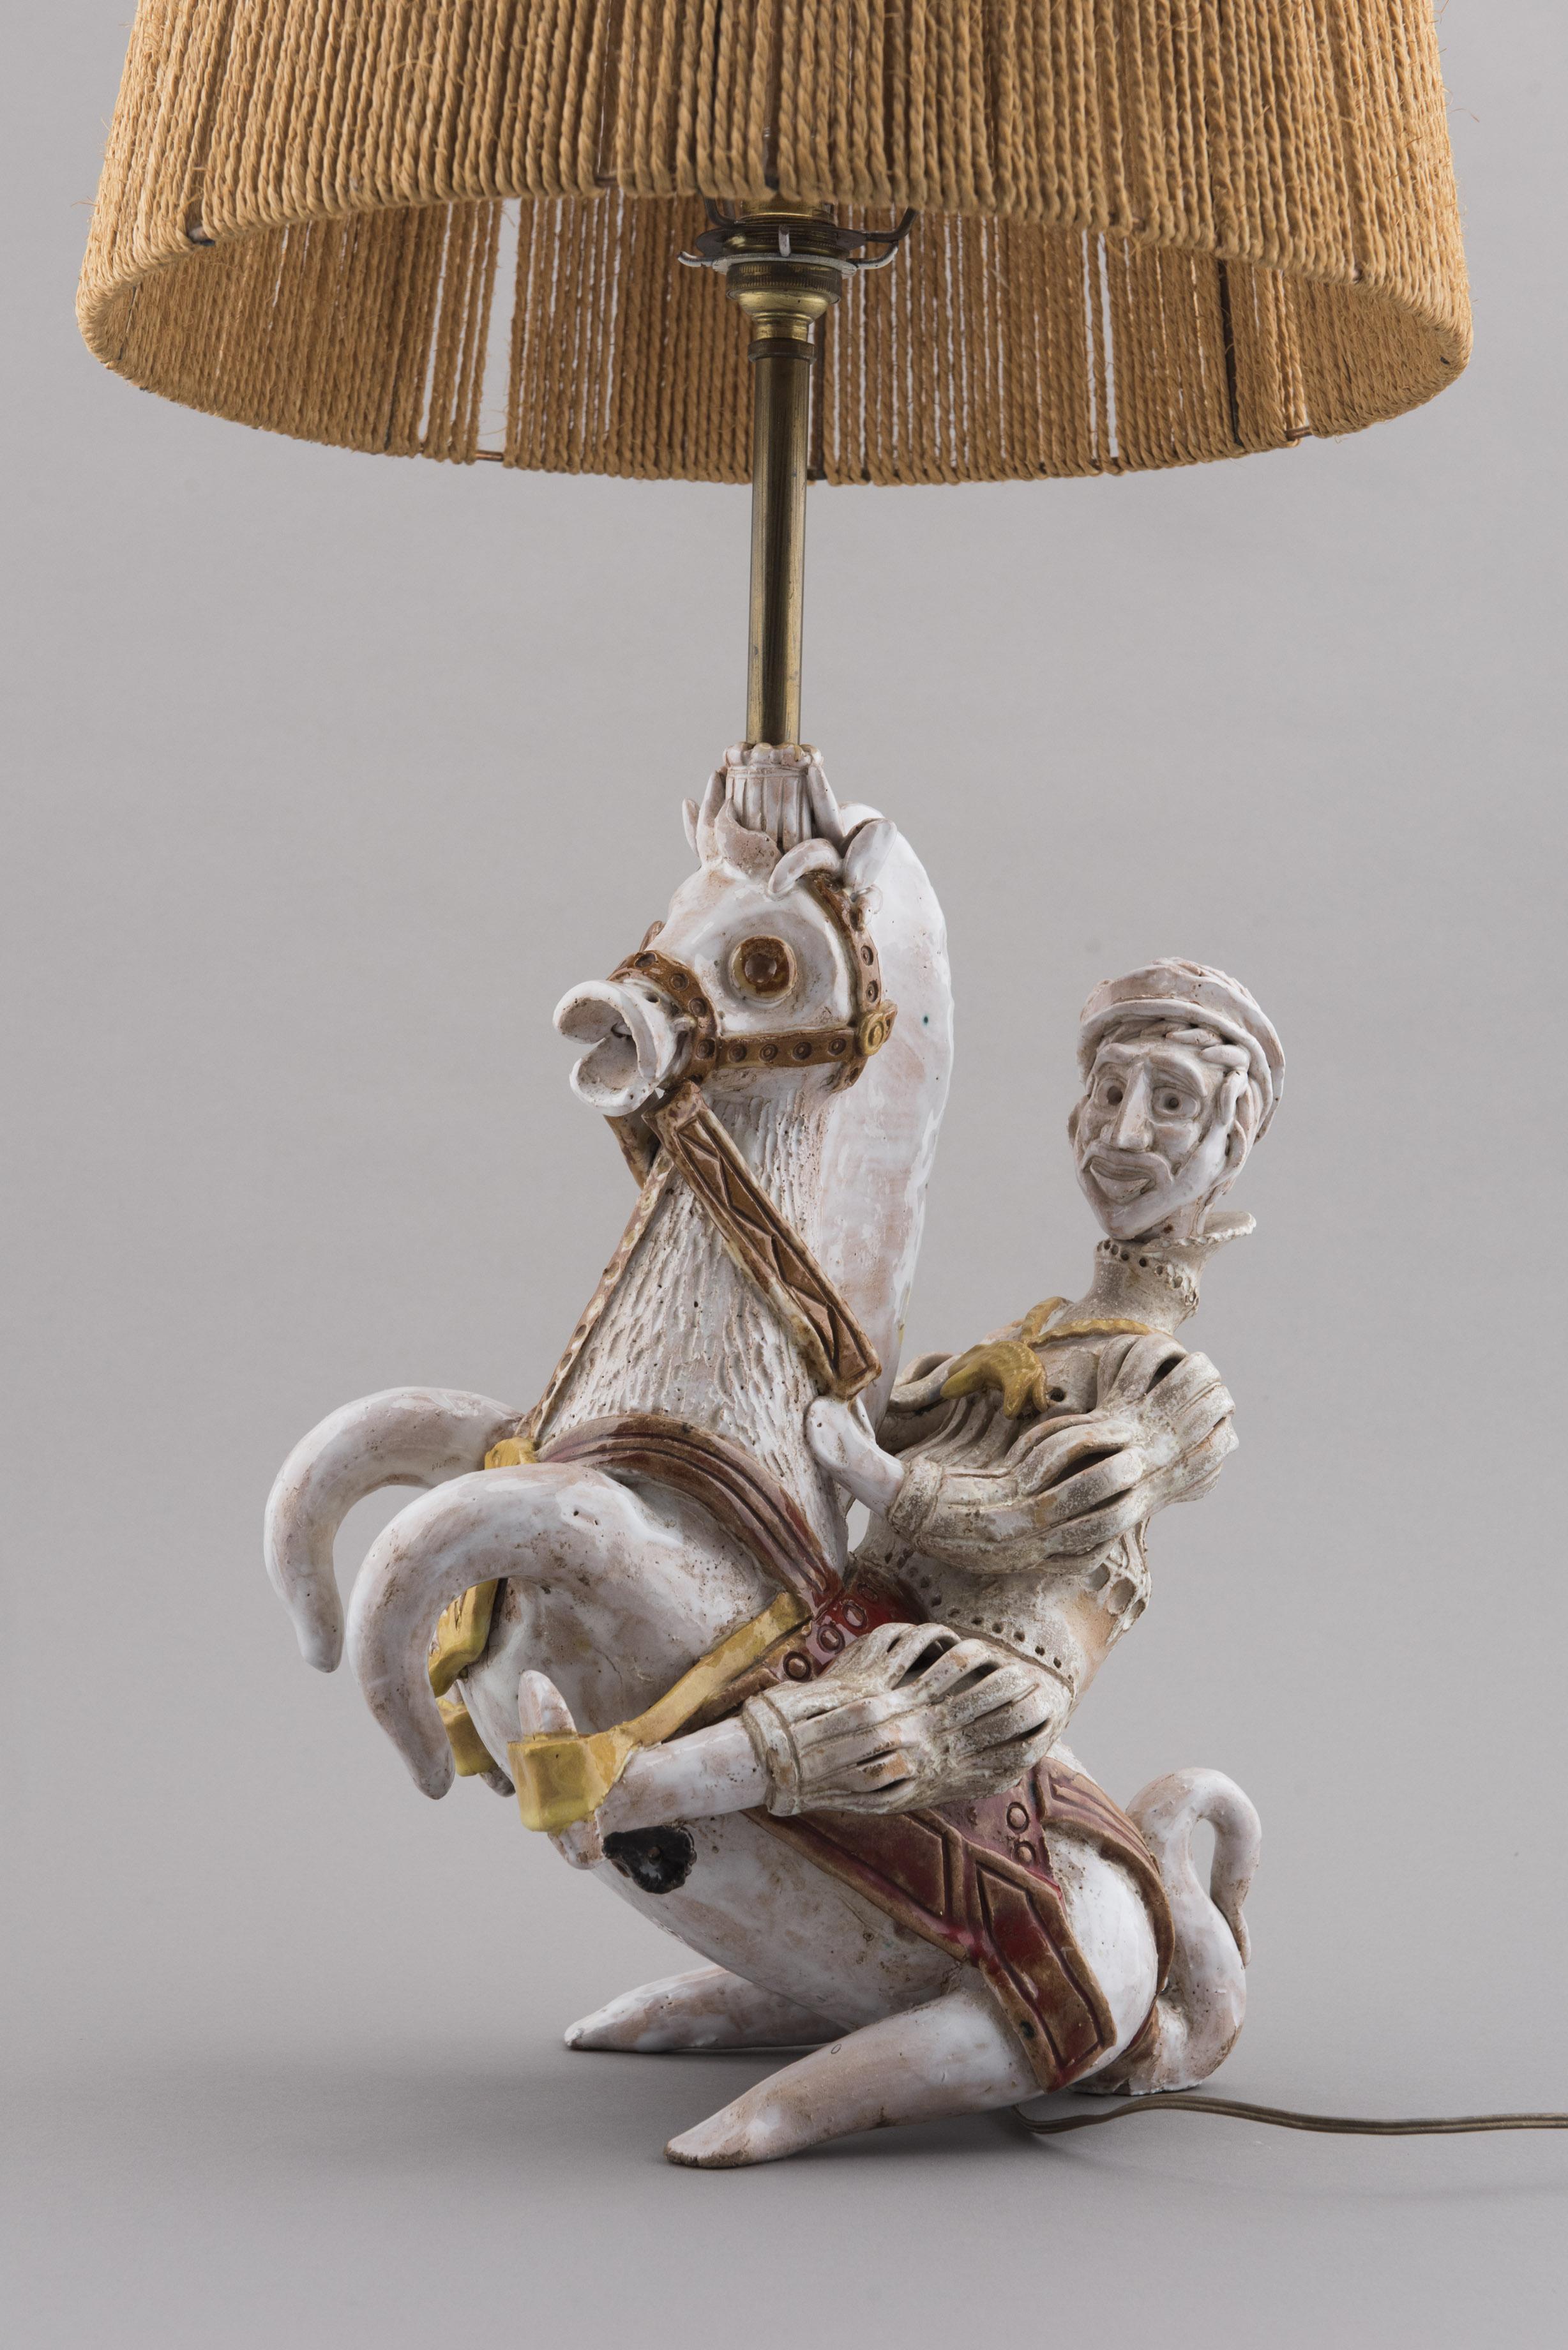 Lamp featuring a knight - as in chess pawn - in ceramic by André Marcharl in the 1950s Vallauris. Shade in cord.
The very limited series of Marchals work shows a clear interest for detail and movement.
On top of the horse, the sitting rider, there's